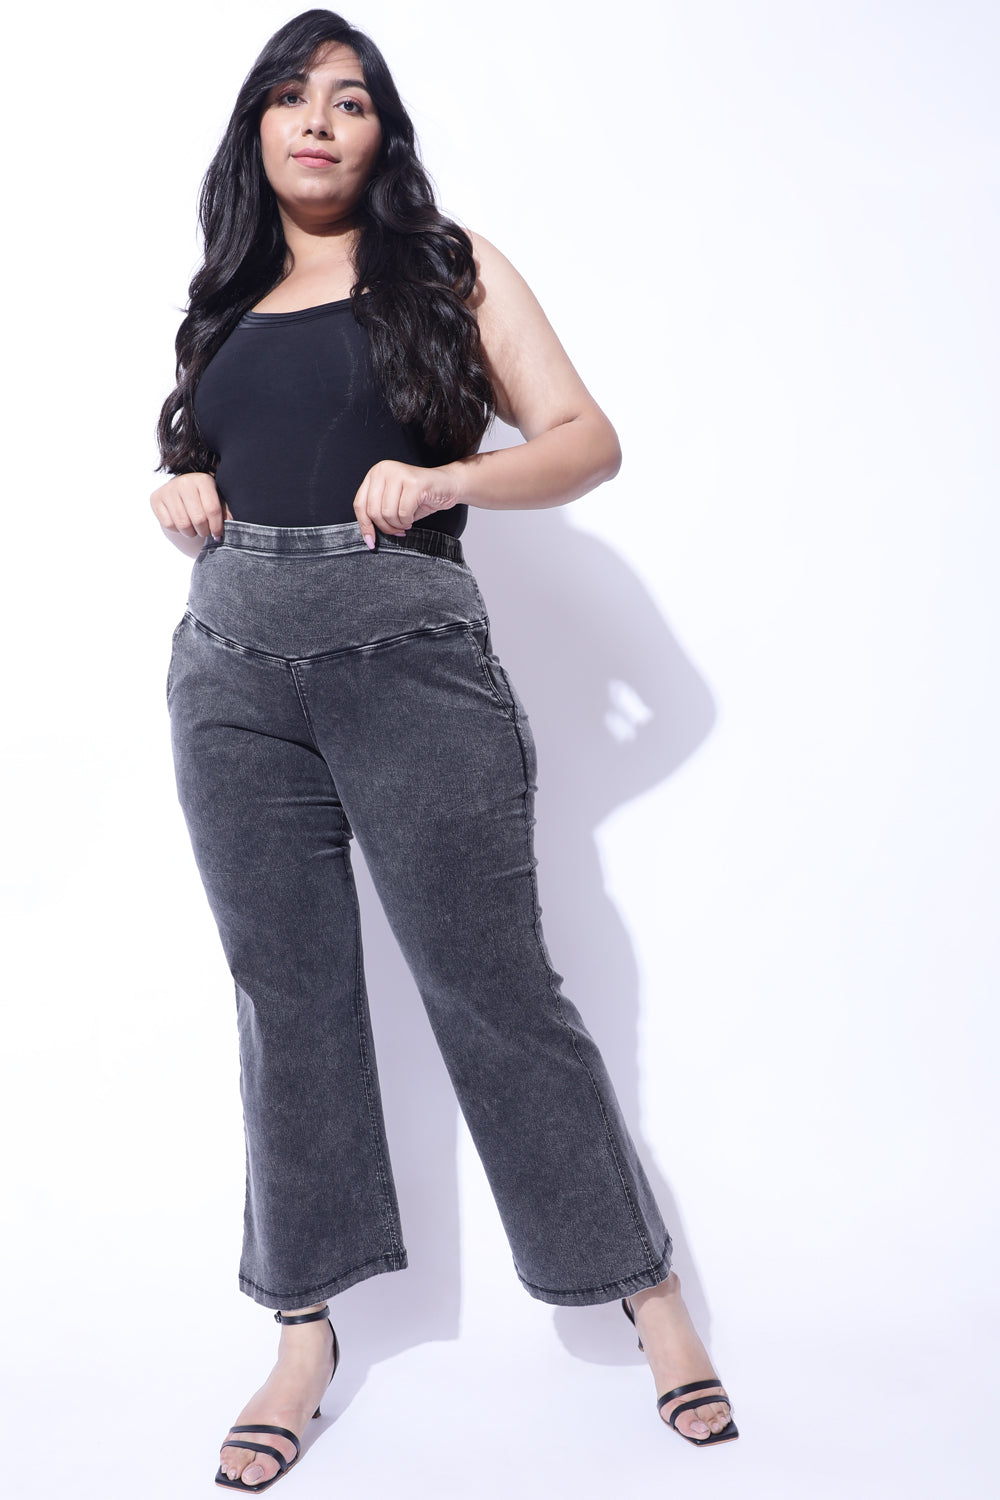 WALSALES High and Thin Loose Womens Pants Plus Size Jeans India